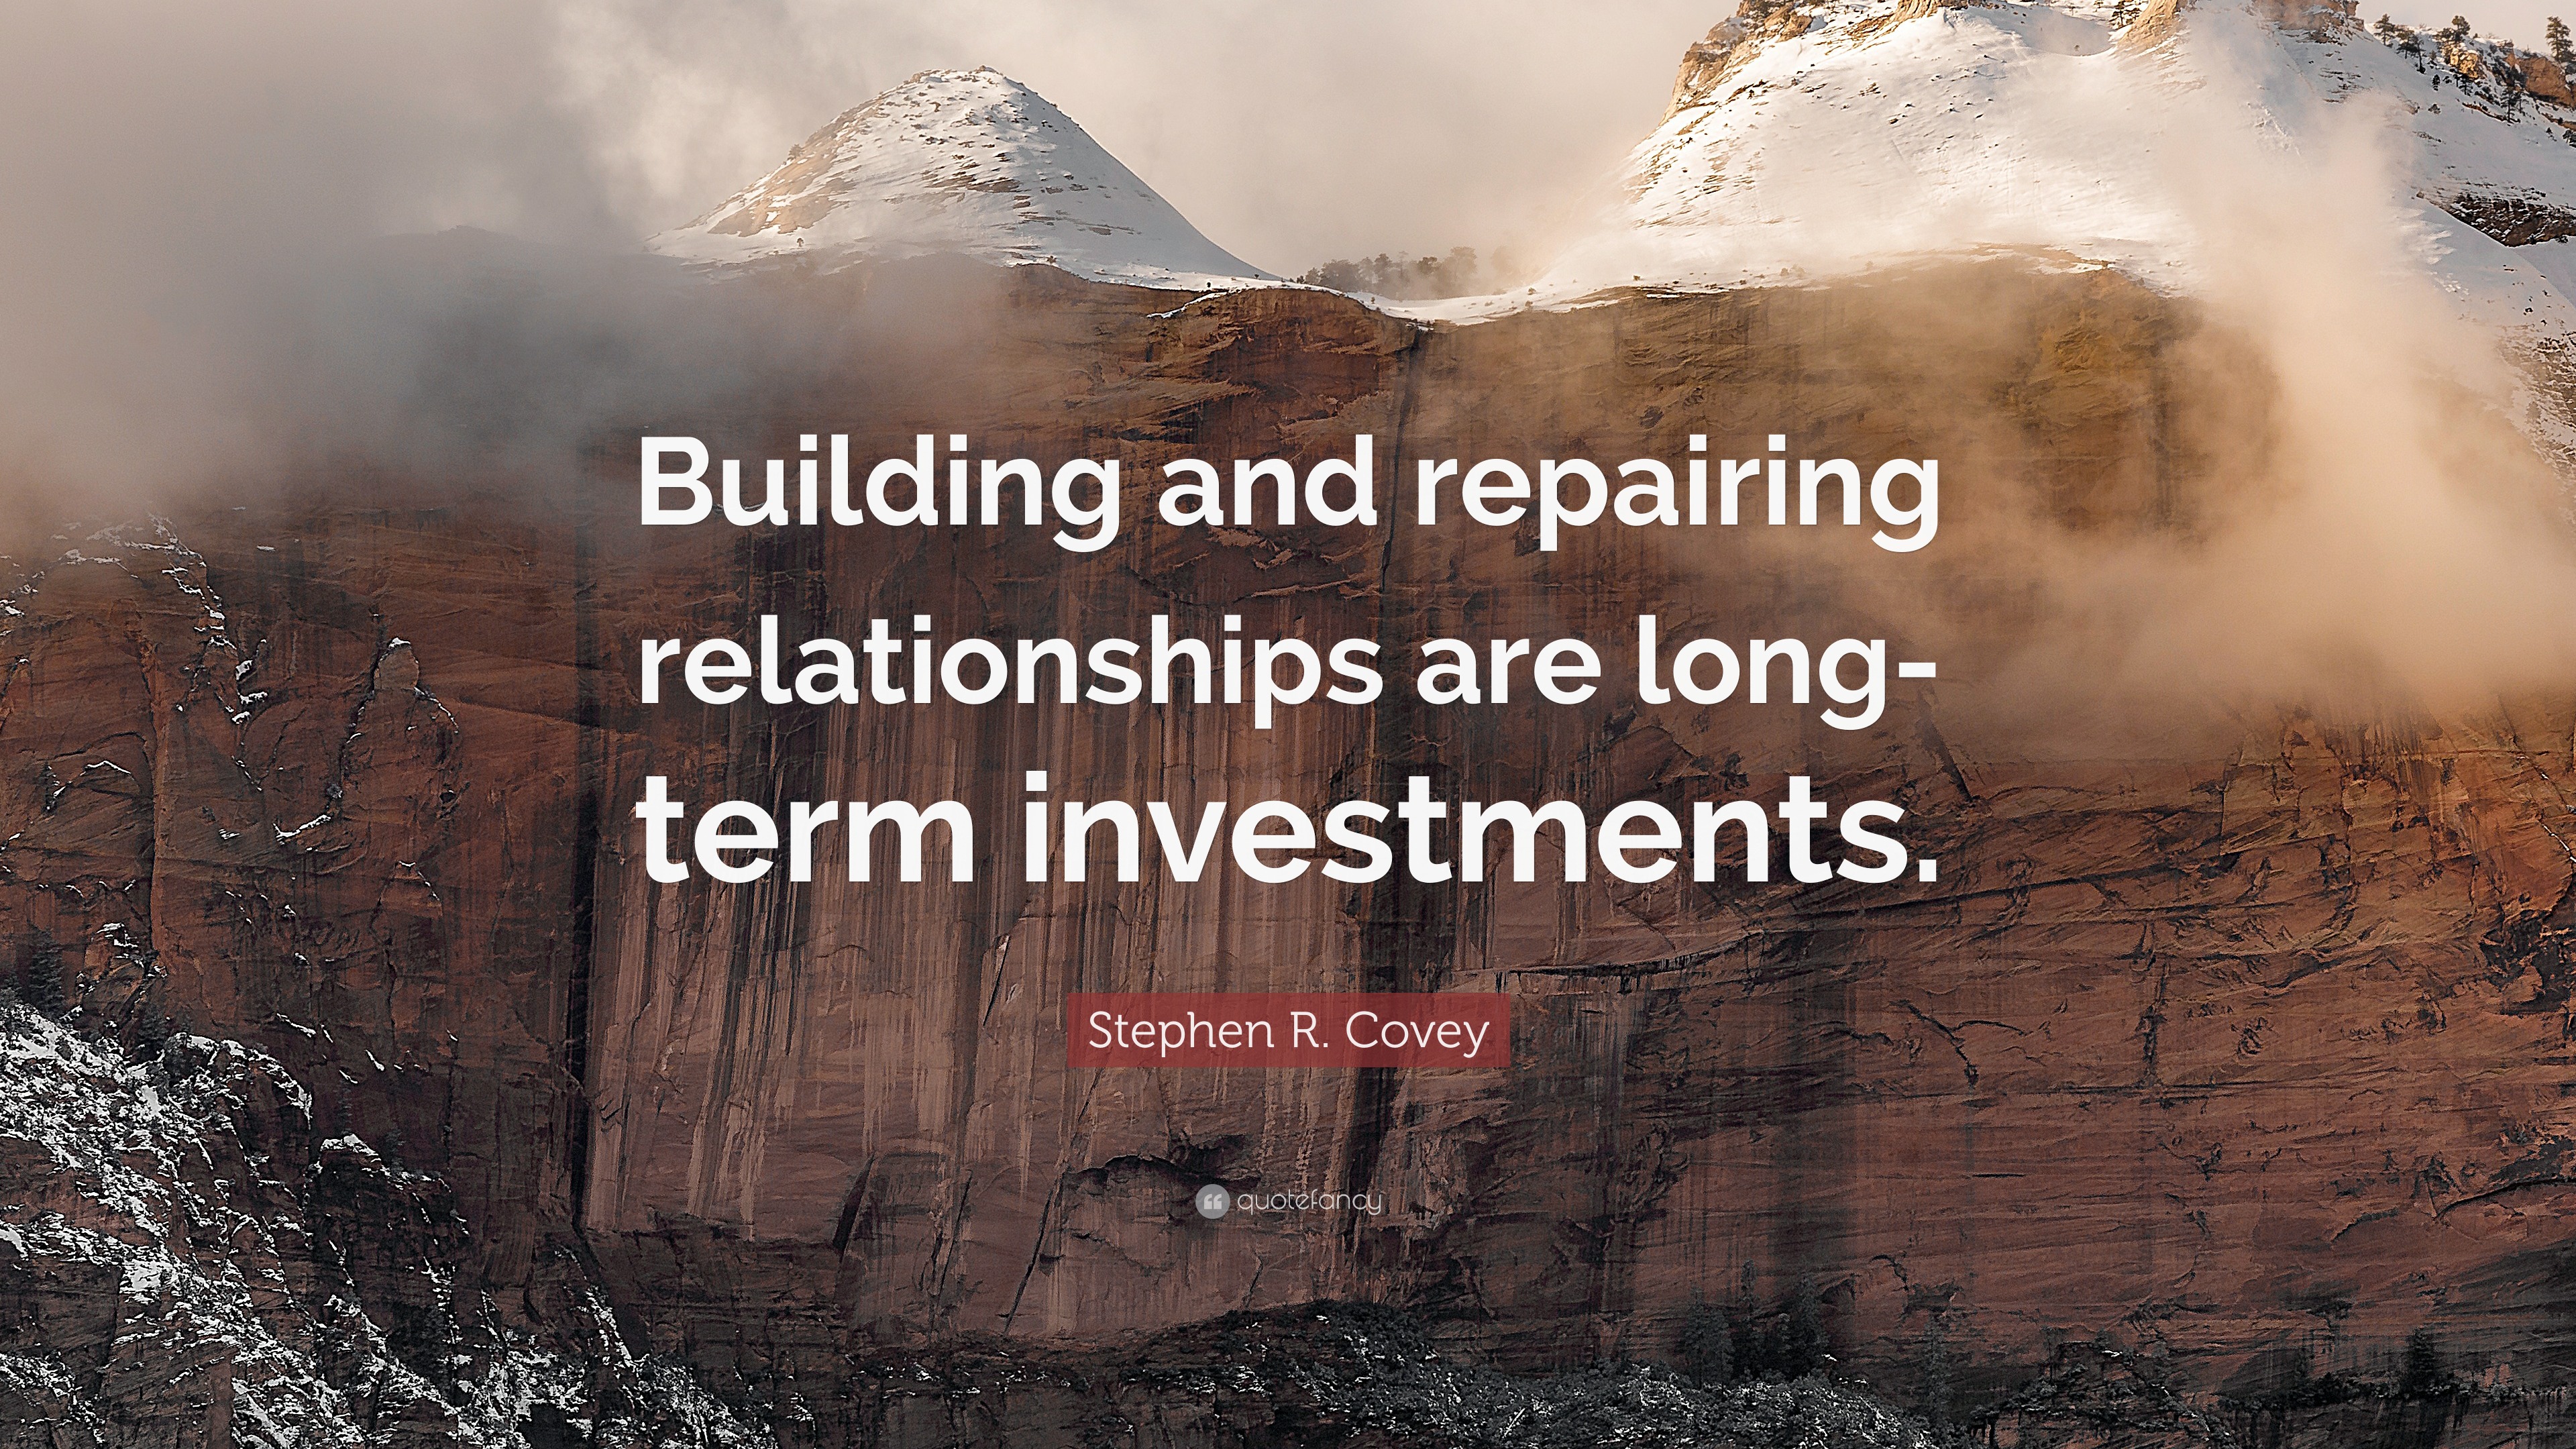 Stephen R Covey Quote “Building and repairing relationships are long term investments